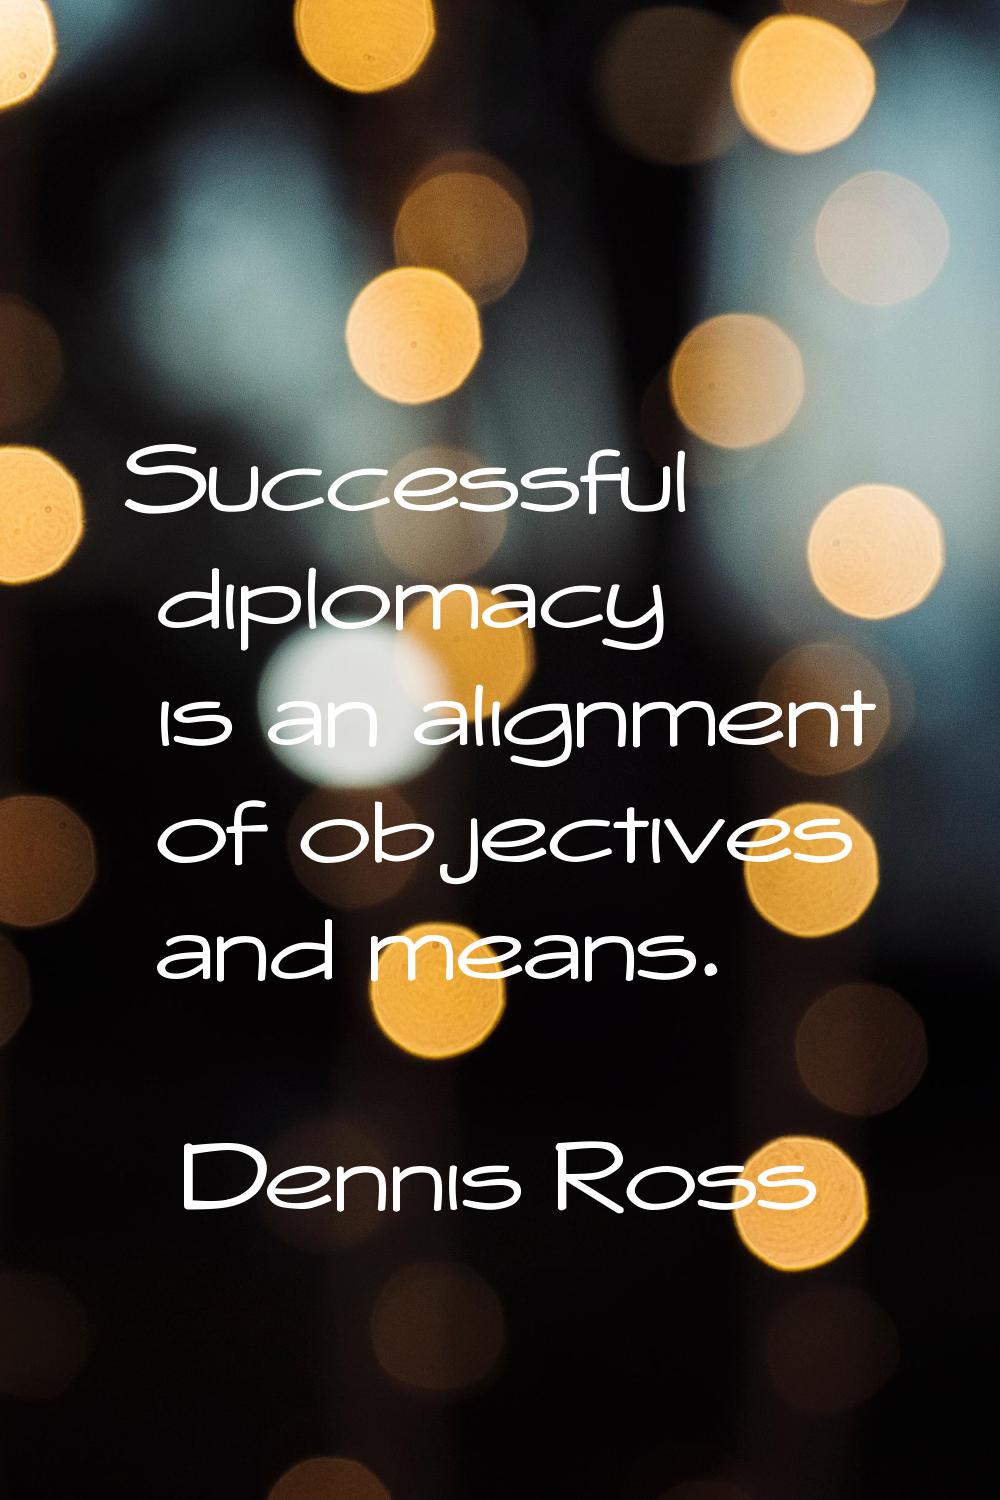 Successful diplomacy is an alignment of objectives and means.